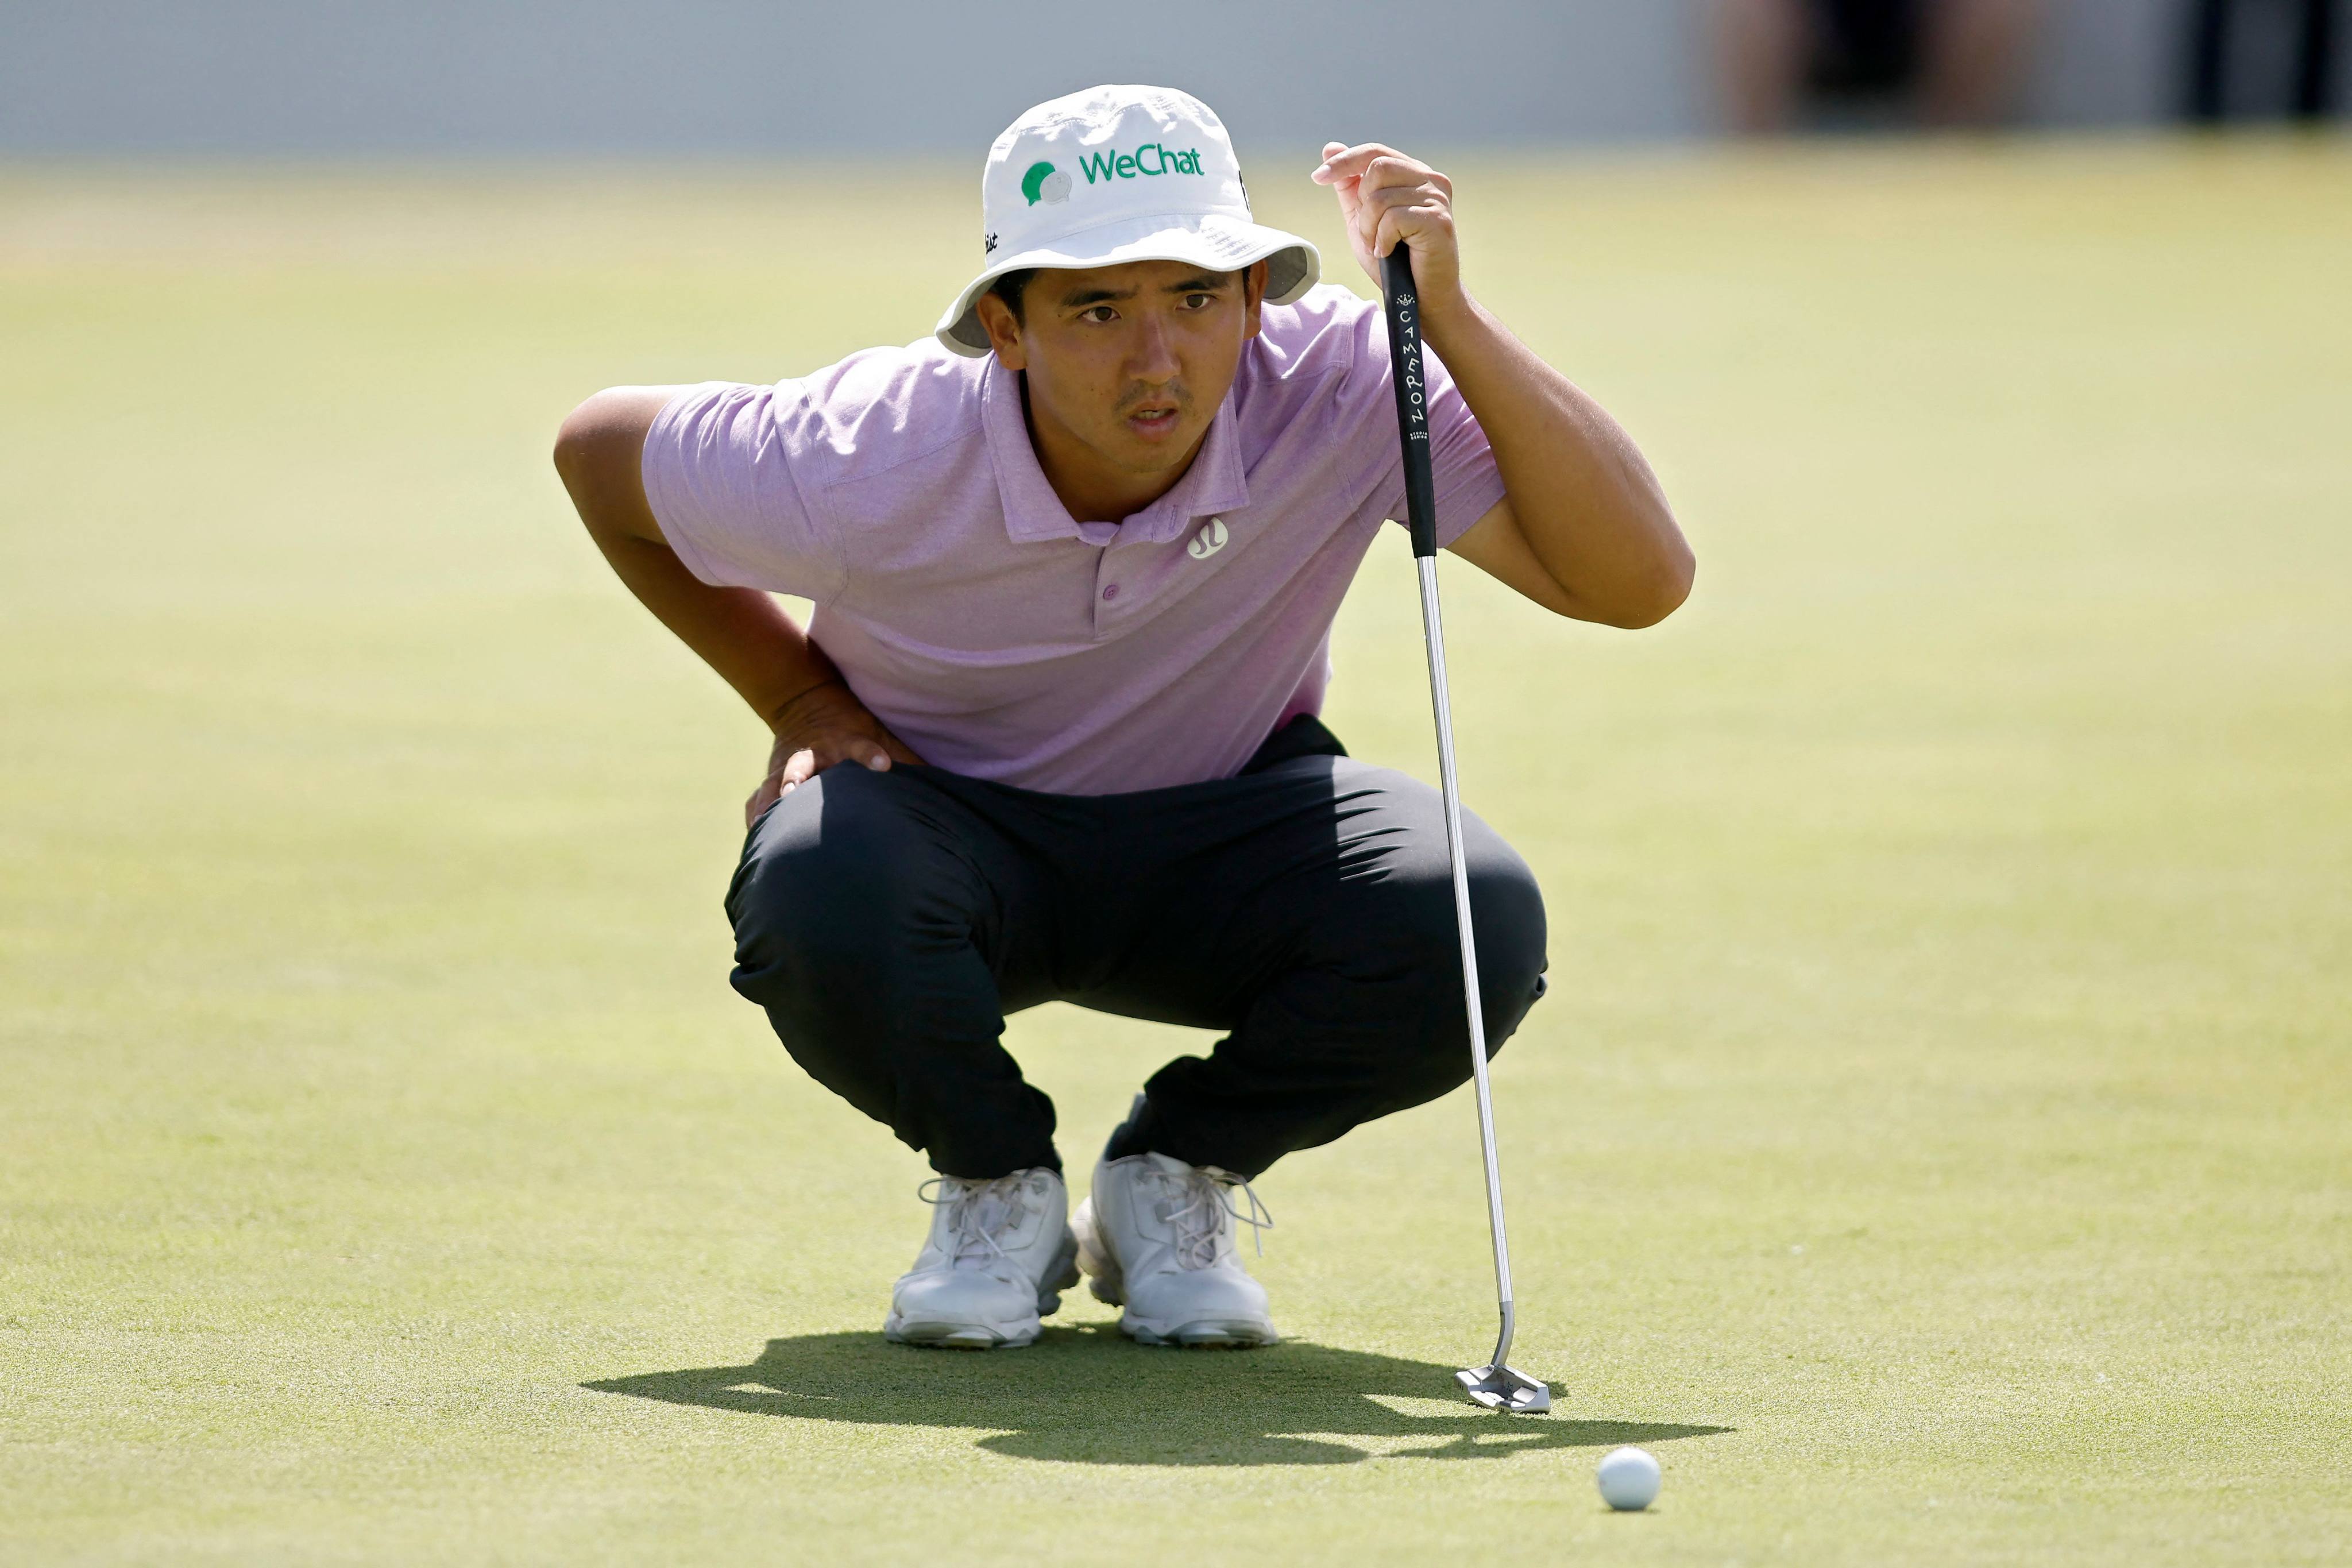 Marty Dou is hoping to create history with his participation in the Olympic golf tournament at the Paris Games. Photo: AFP